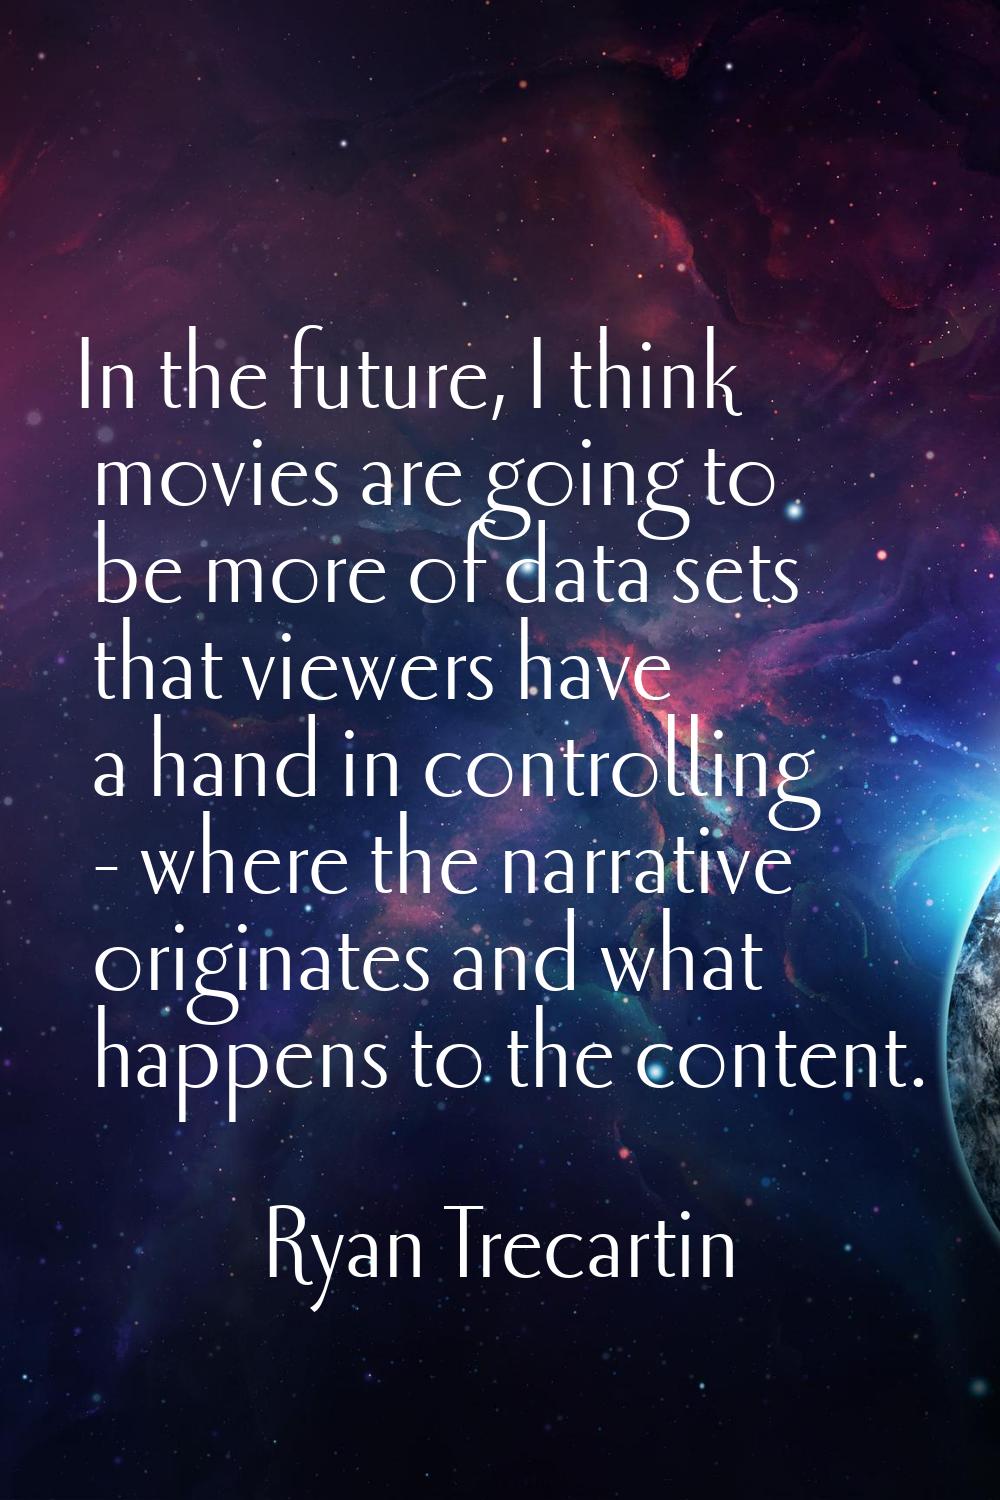 In the future, I think movies are going to be more of data sets that viewers have a hand in control